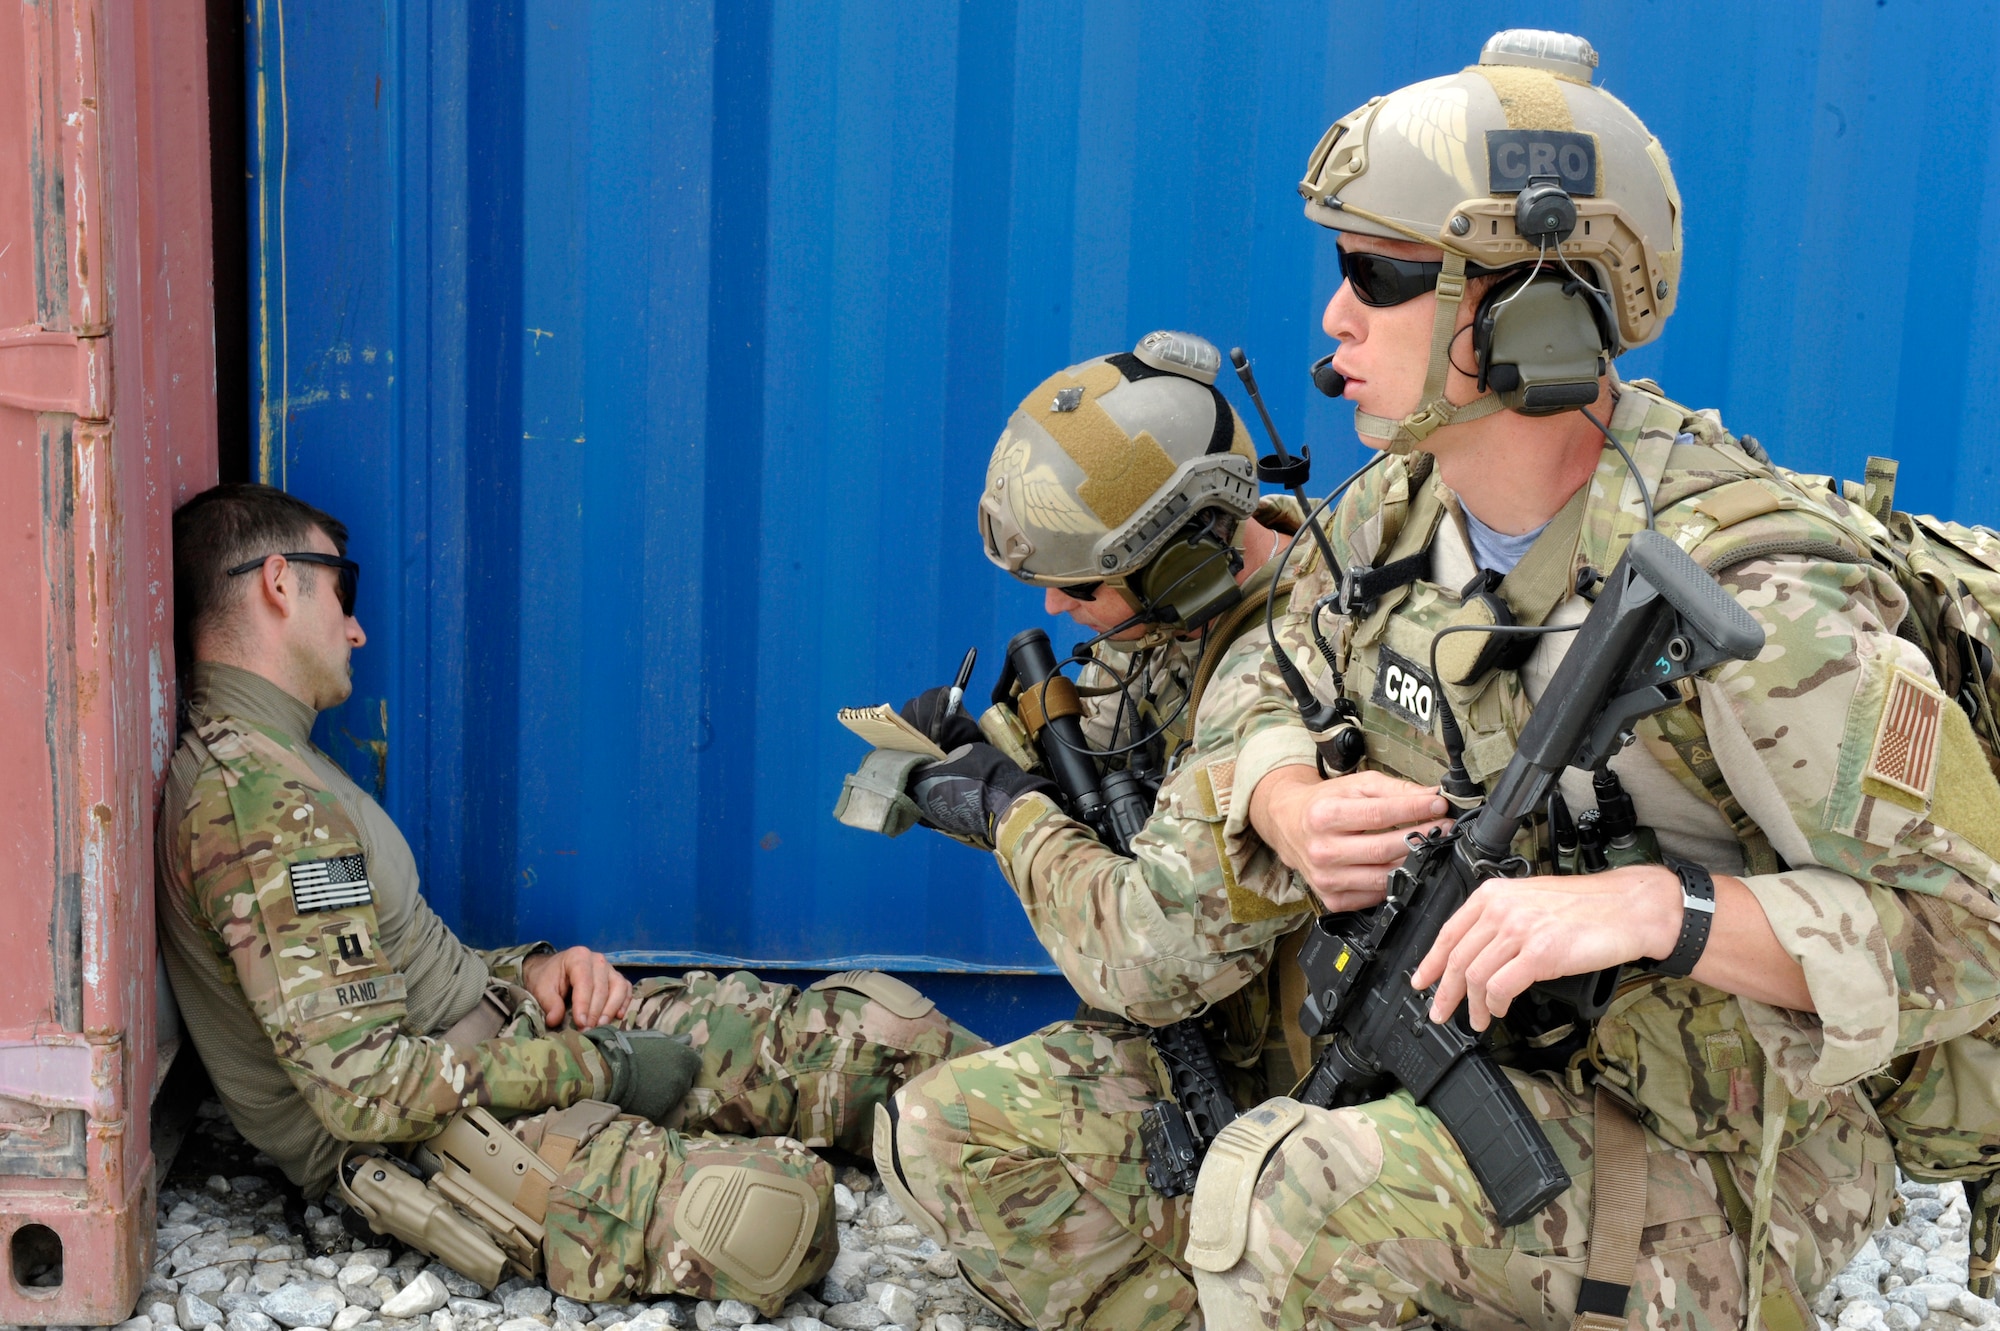 U.S. Army Captain William Rand simulates an injury as Air Force Master Sgt. Duane Hayes and 1st. Lt. Christopher Goetz, Air Force Pararescuemen from the 83rd Expeditionary Rescue Squadron, 455 Air Expeditionary Wing, Bagram Airfield, Afghanistan, provide care and cover during a training exercise here May 5, 2014. The scenario simulated a vehicle striking an Improvised Explosive Device. During the training, rescue crews flew on HH-60G Pave Hawks to the simulated point of injury, provided security, treated patients, prepared them for travel, and safely departed the area. Hayes and Goetz are deployed from Moody Air Force Base, Ga.  (U.S. Air Force photo by Maj. Brandon Lingle/Released)